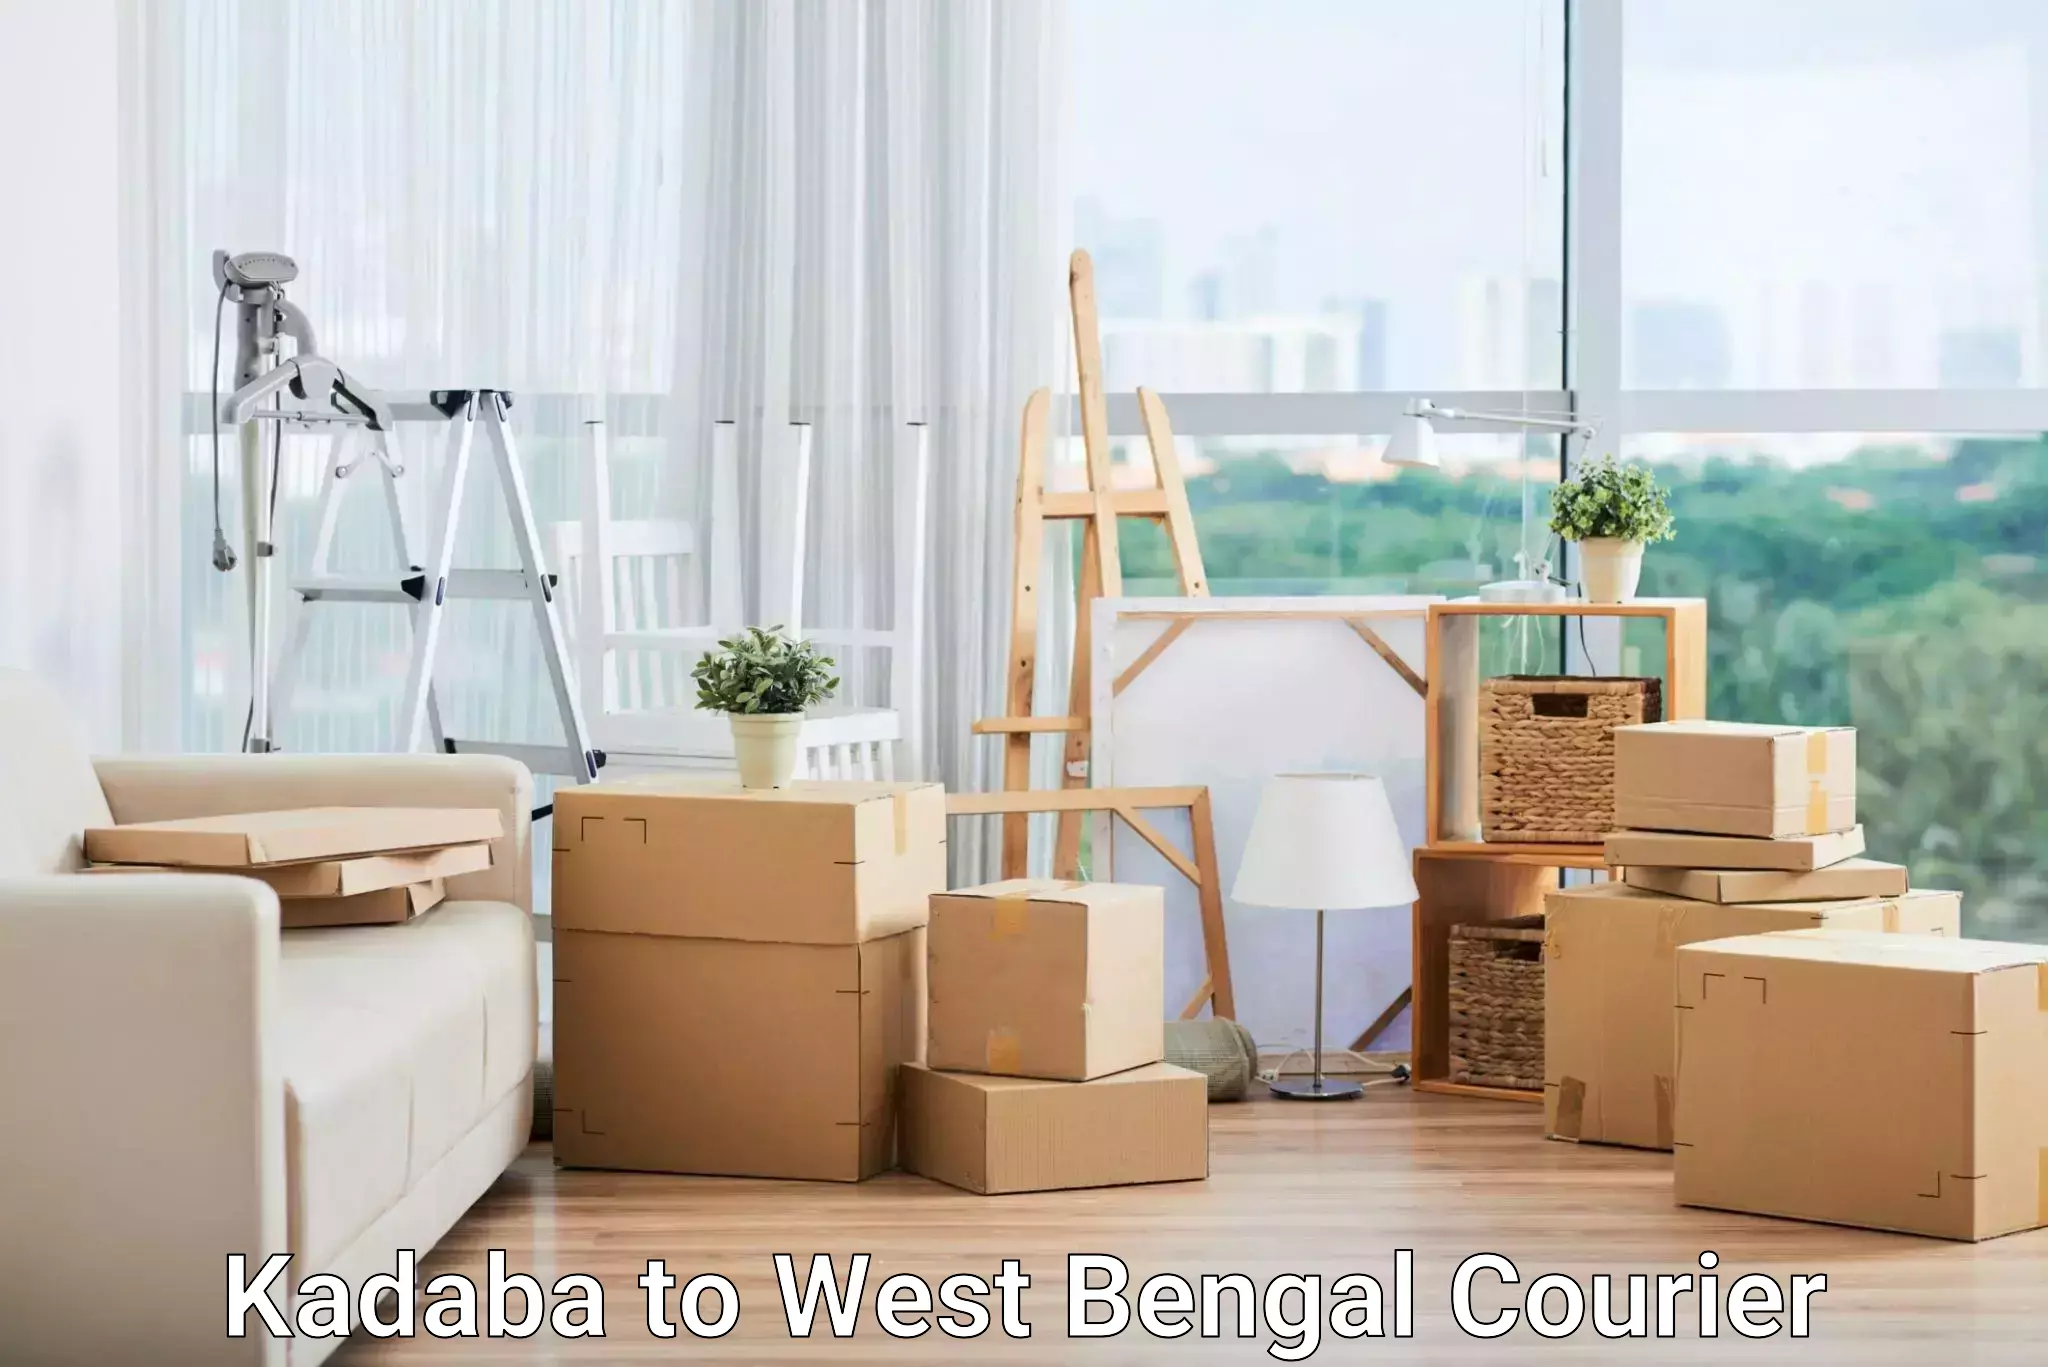 Express delivery network Kadaba to West Bengal